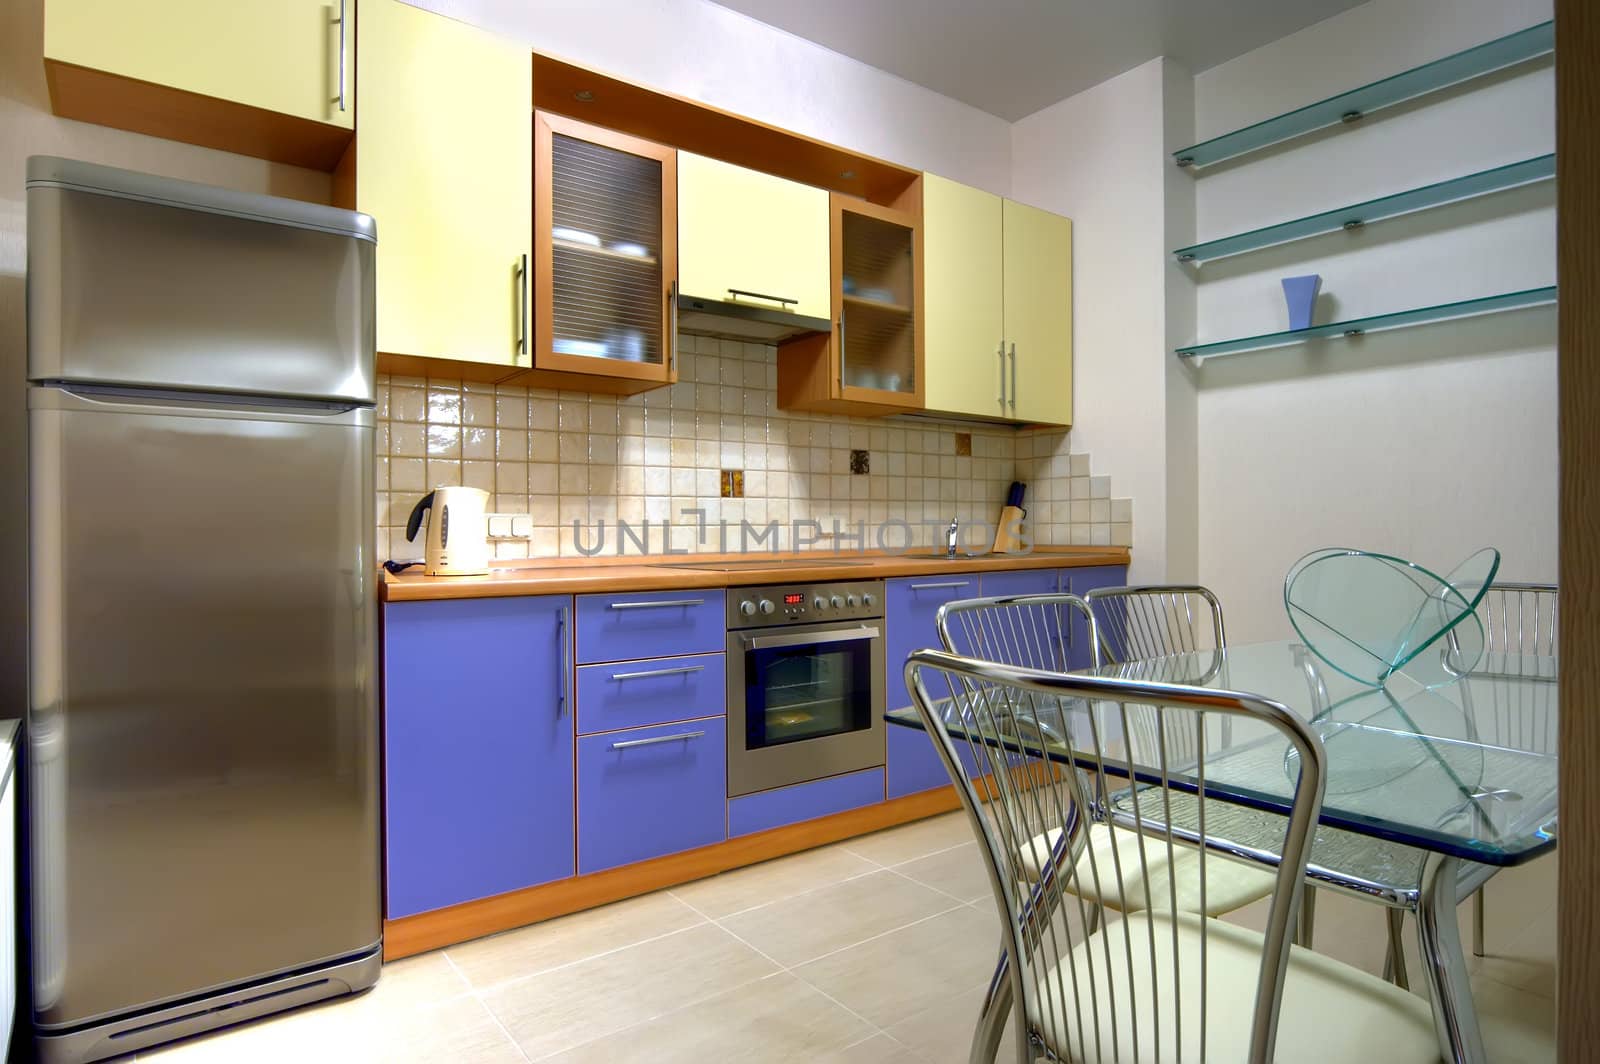 Compact modern kitchen with the built in home appliances